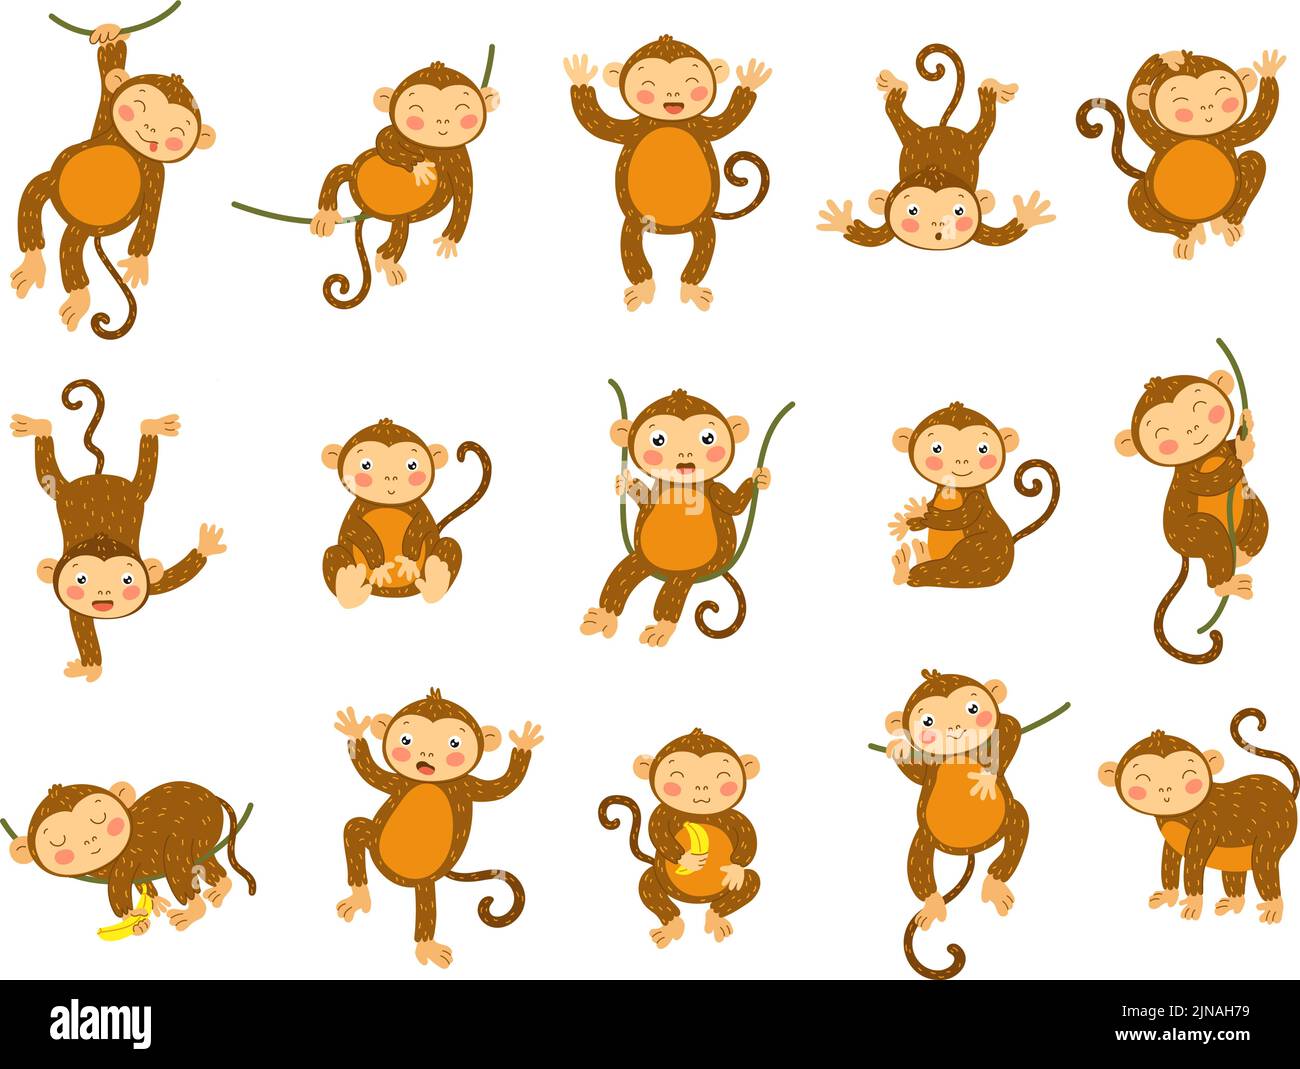 Cute monkey. Cartoon wild animals in different poses, funny ape monkeys and primate character vector set Stock Vector